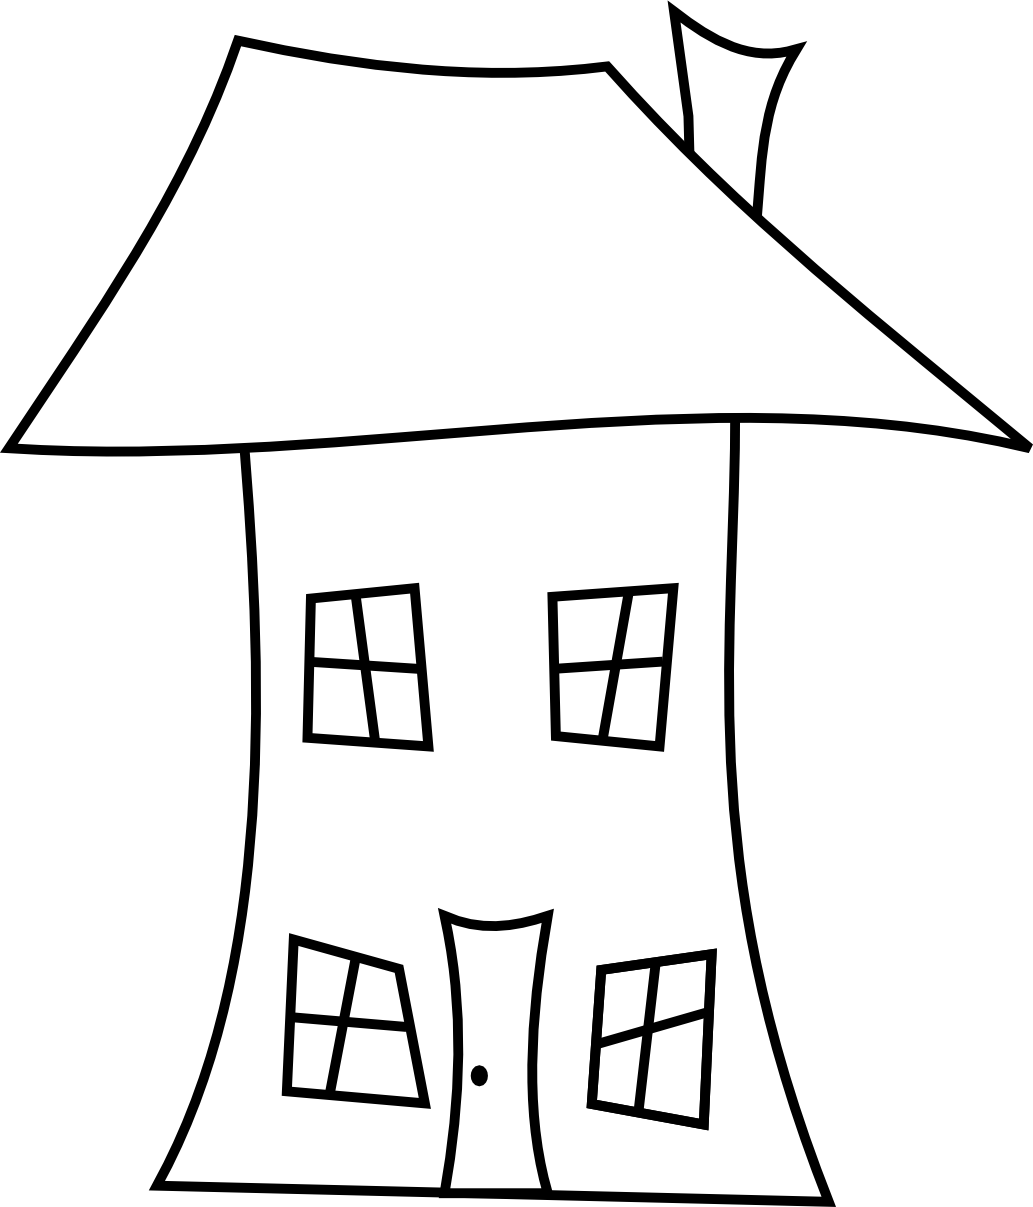 House Line Drawing - Clipart library